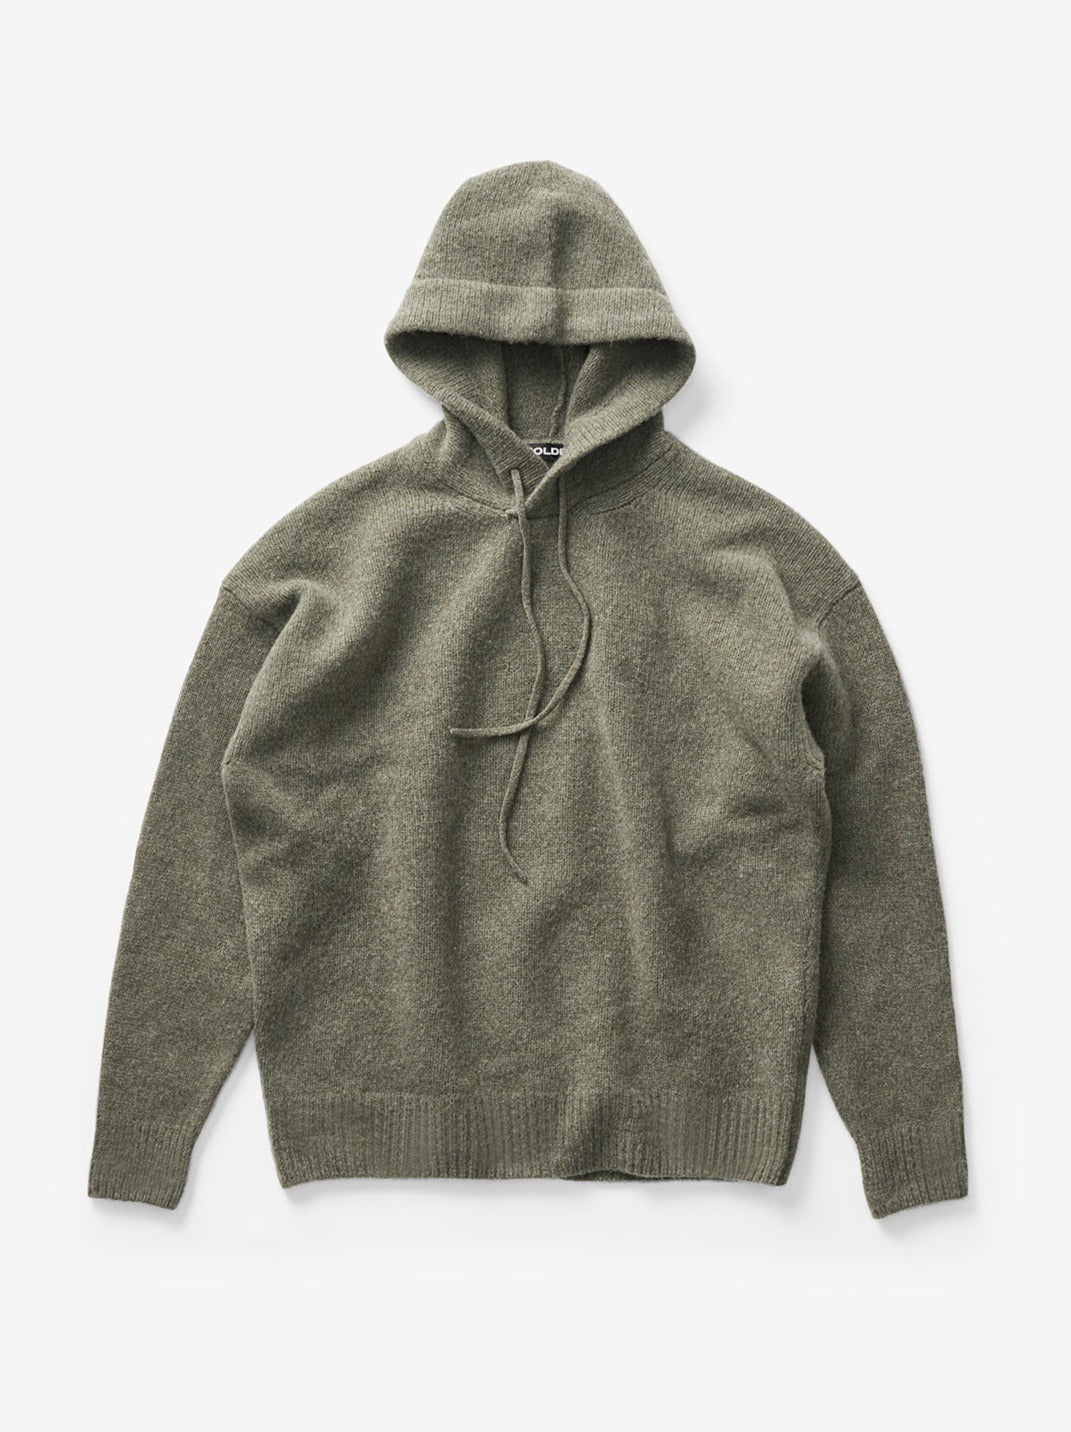 WOOL KNIT HOODIE - Stone Green - flat lay - front